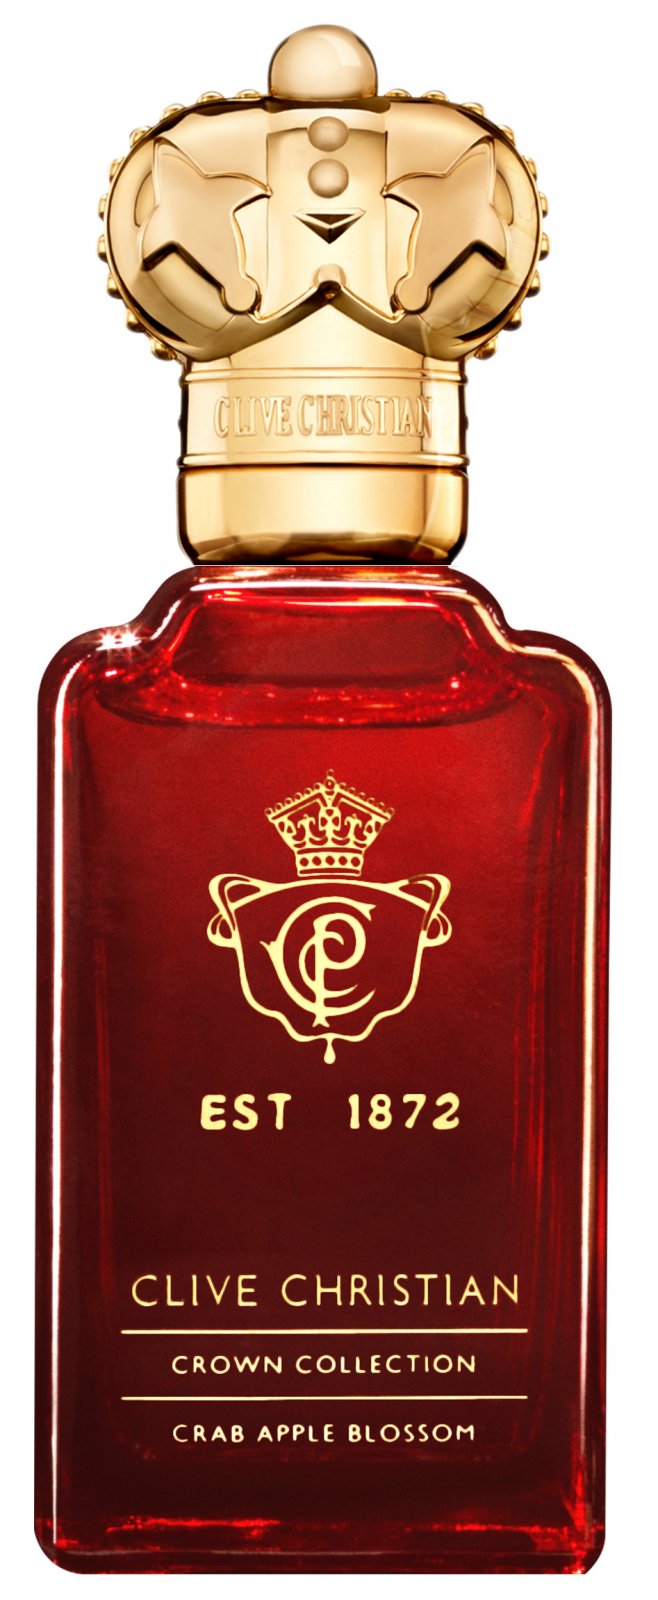 Crown collection. Парфюм Clive Christian 1872. Clive Christian Crab Apple Blossom Perfume 50ml. Clive Christian Crown collection Crab Apple Blossom. Clive Christian Crown collection Crab Apple Blossom духи.